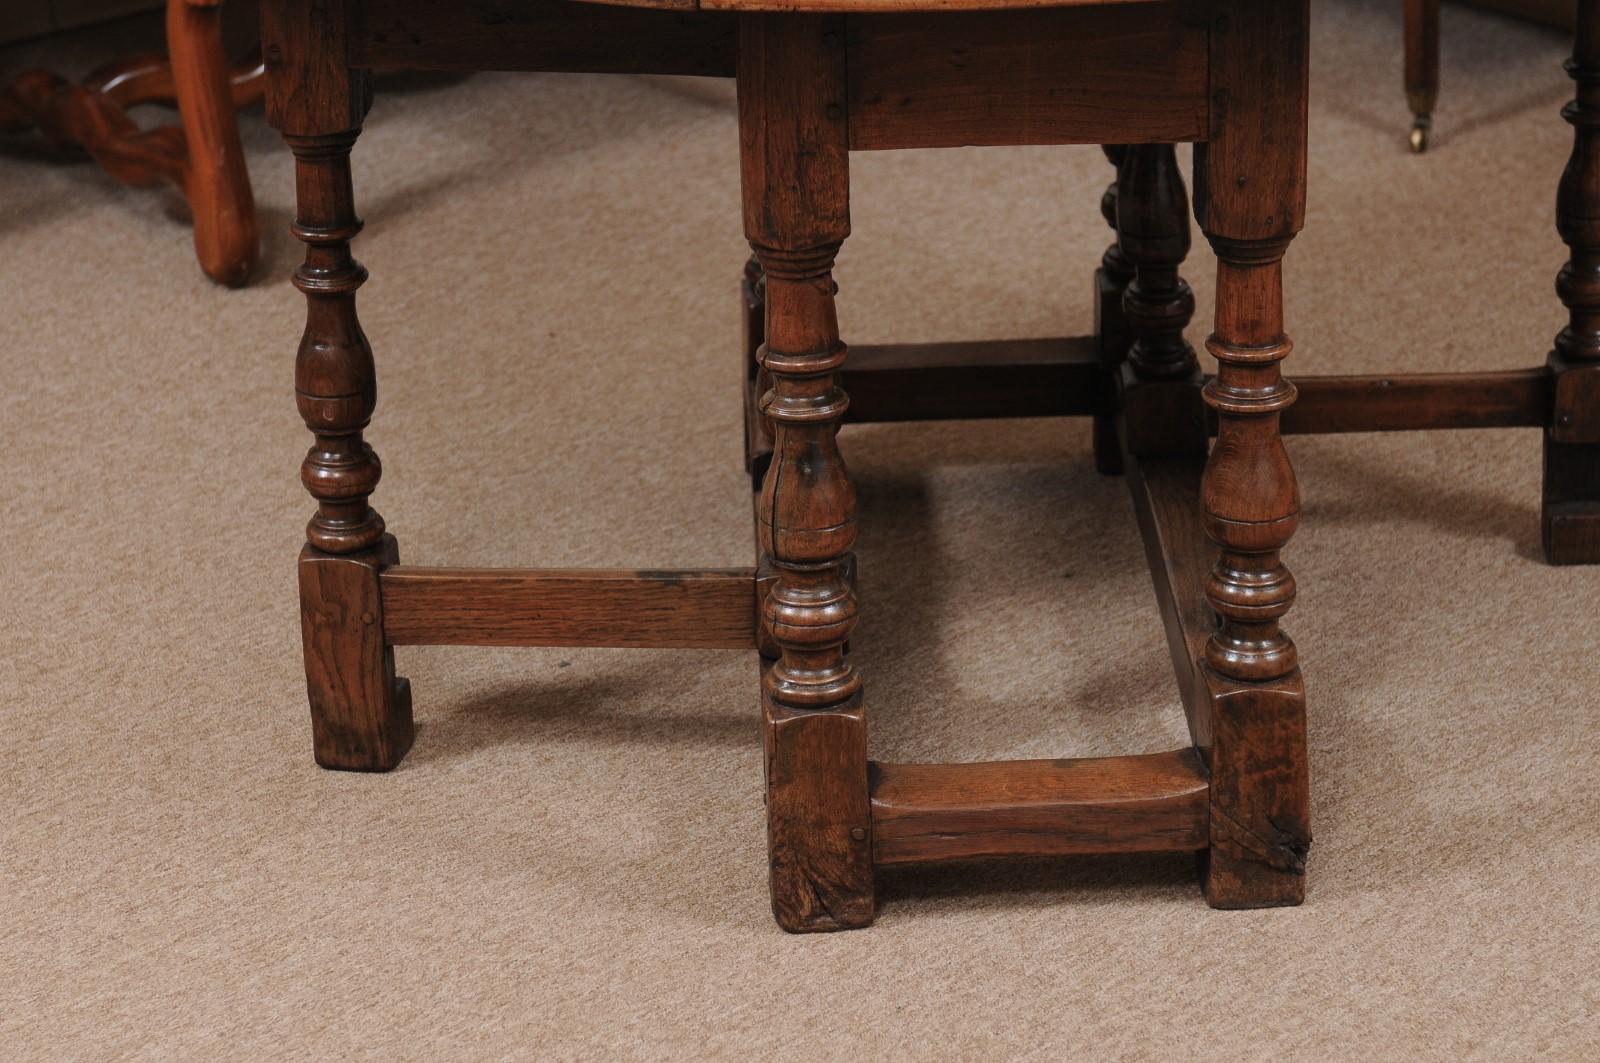 18th Century English Walnut Gate Leg Table with Drop Leaves & Turned Legs For Sale 5